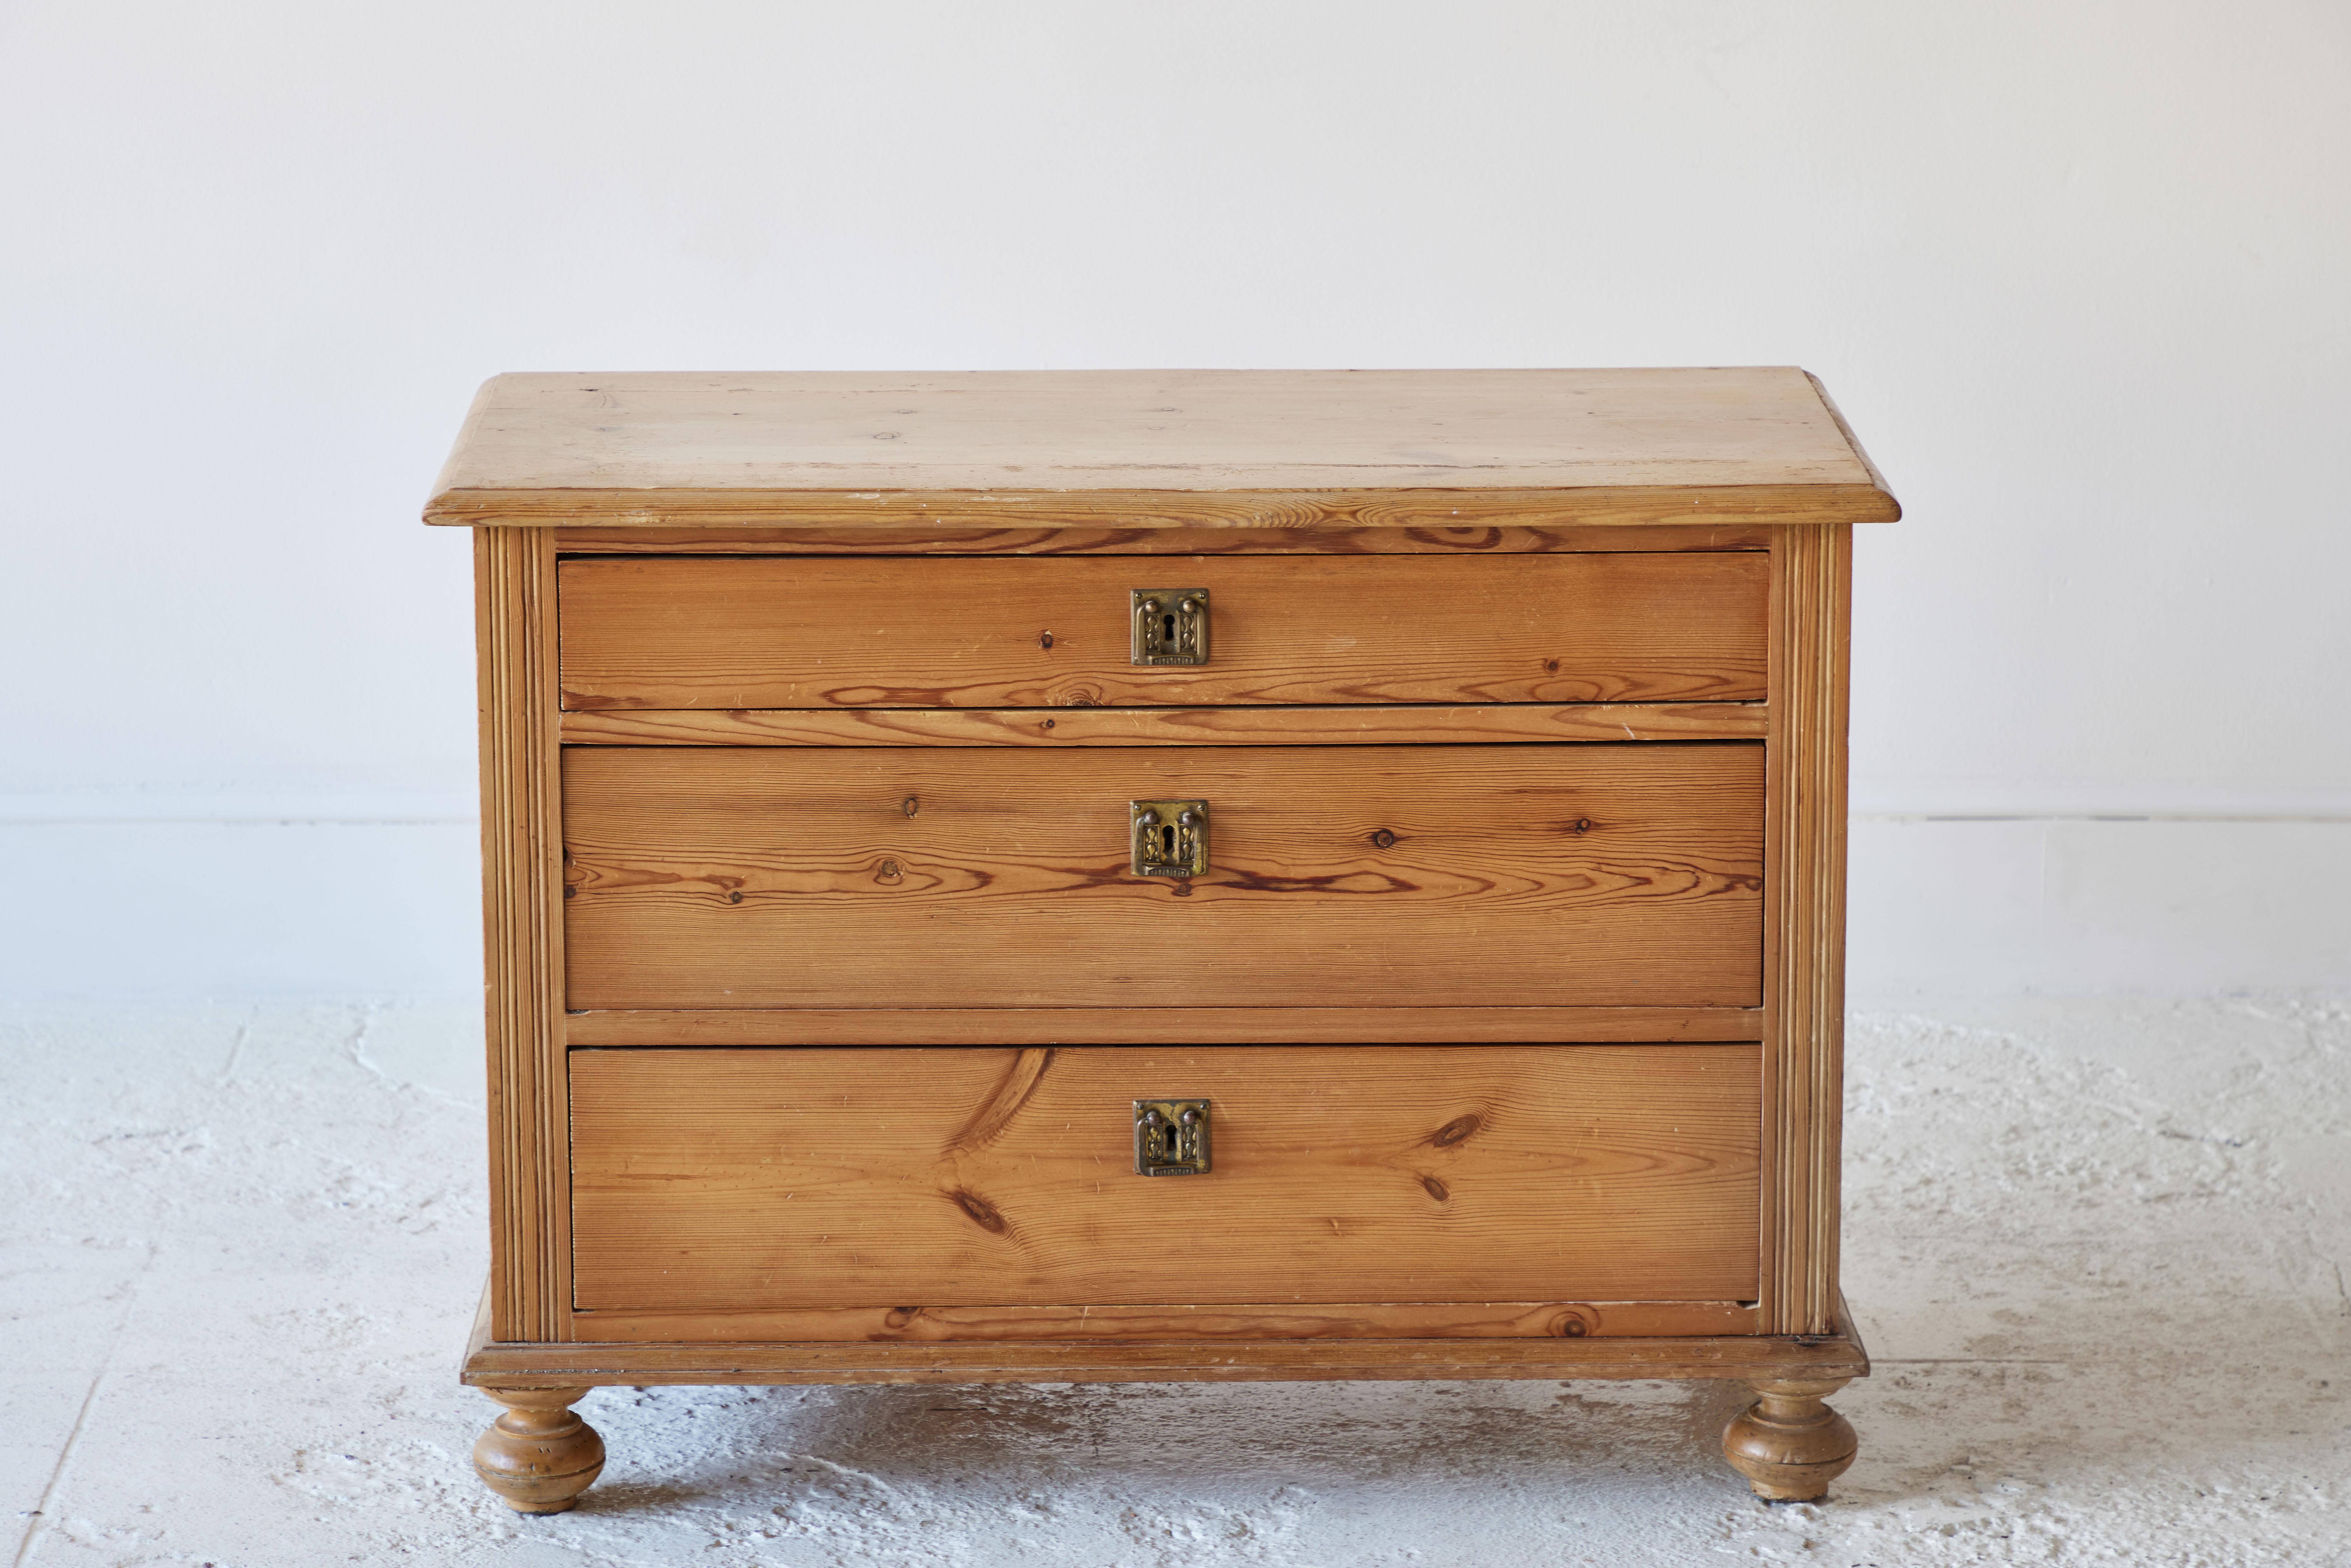 Early American pine three chest of drawers with turned feet.